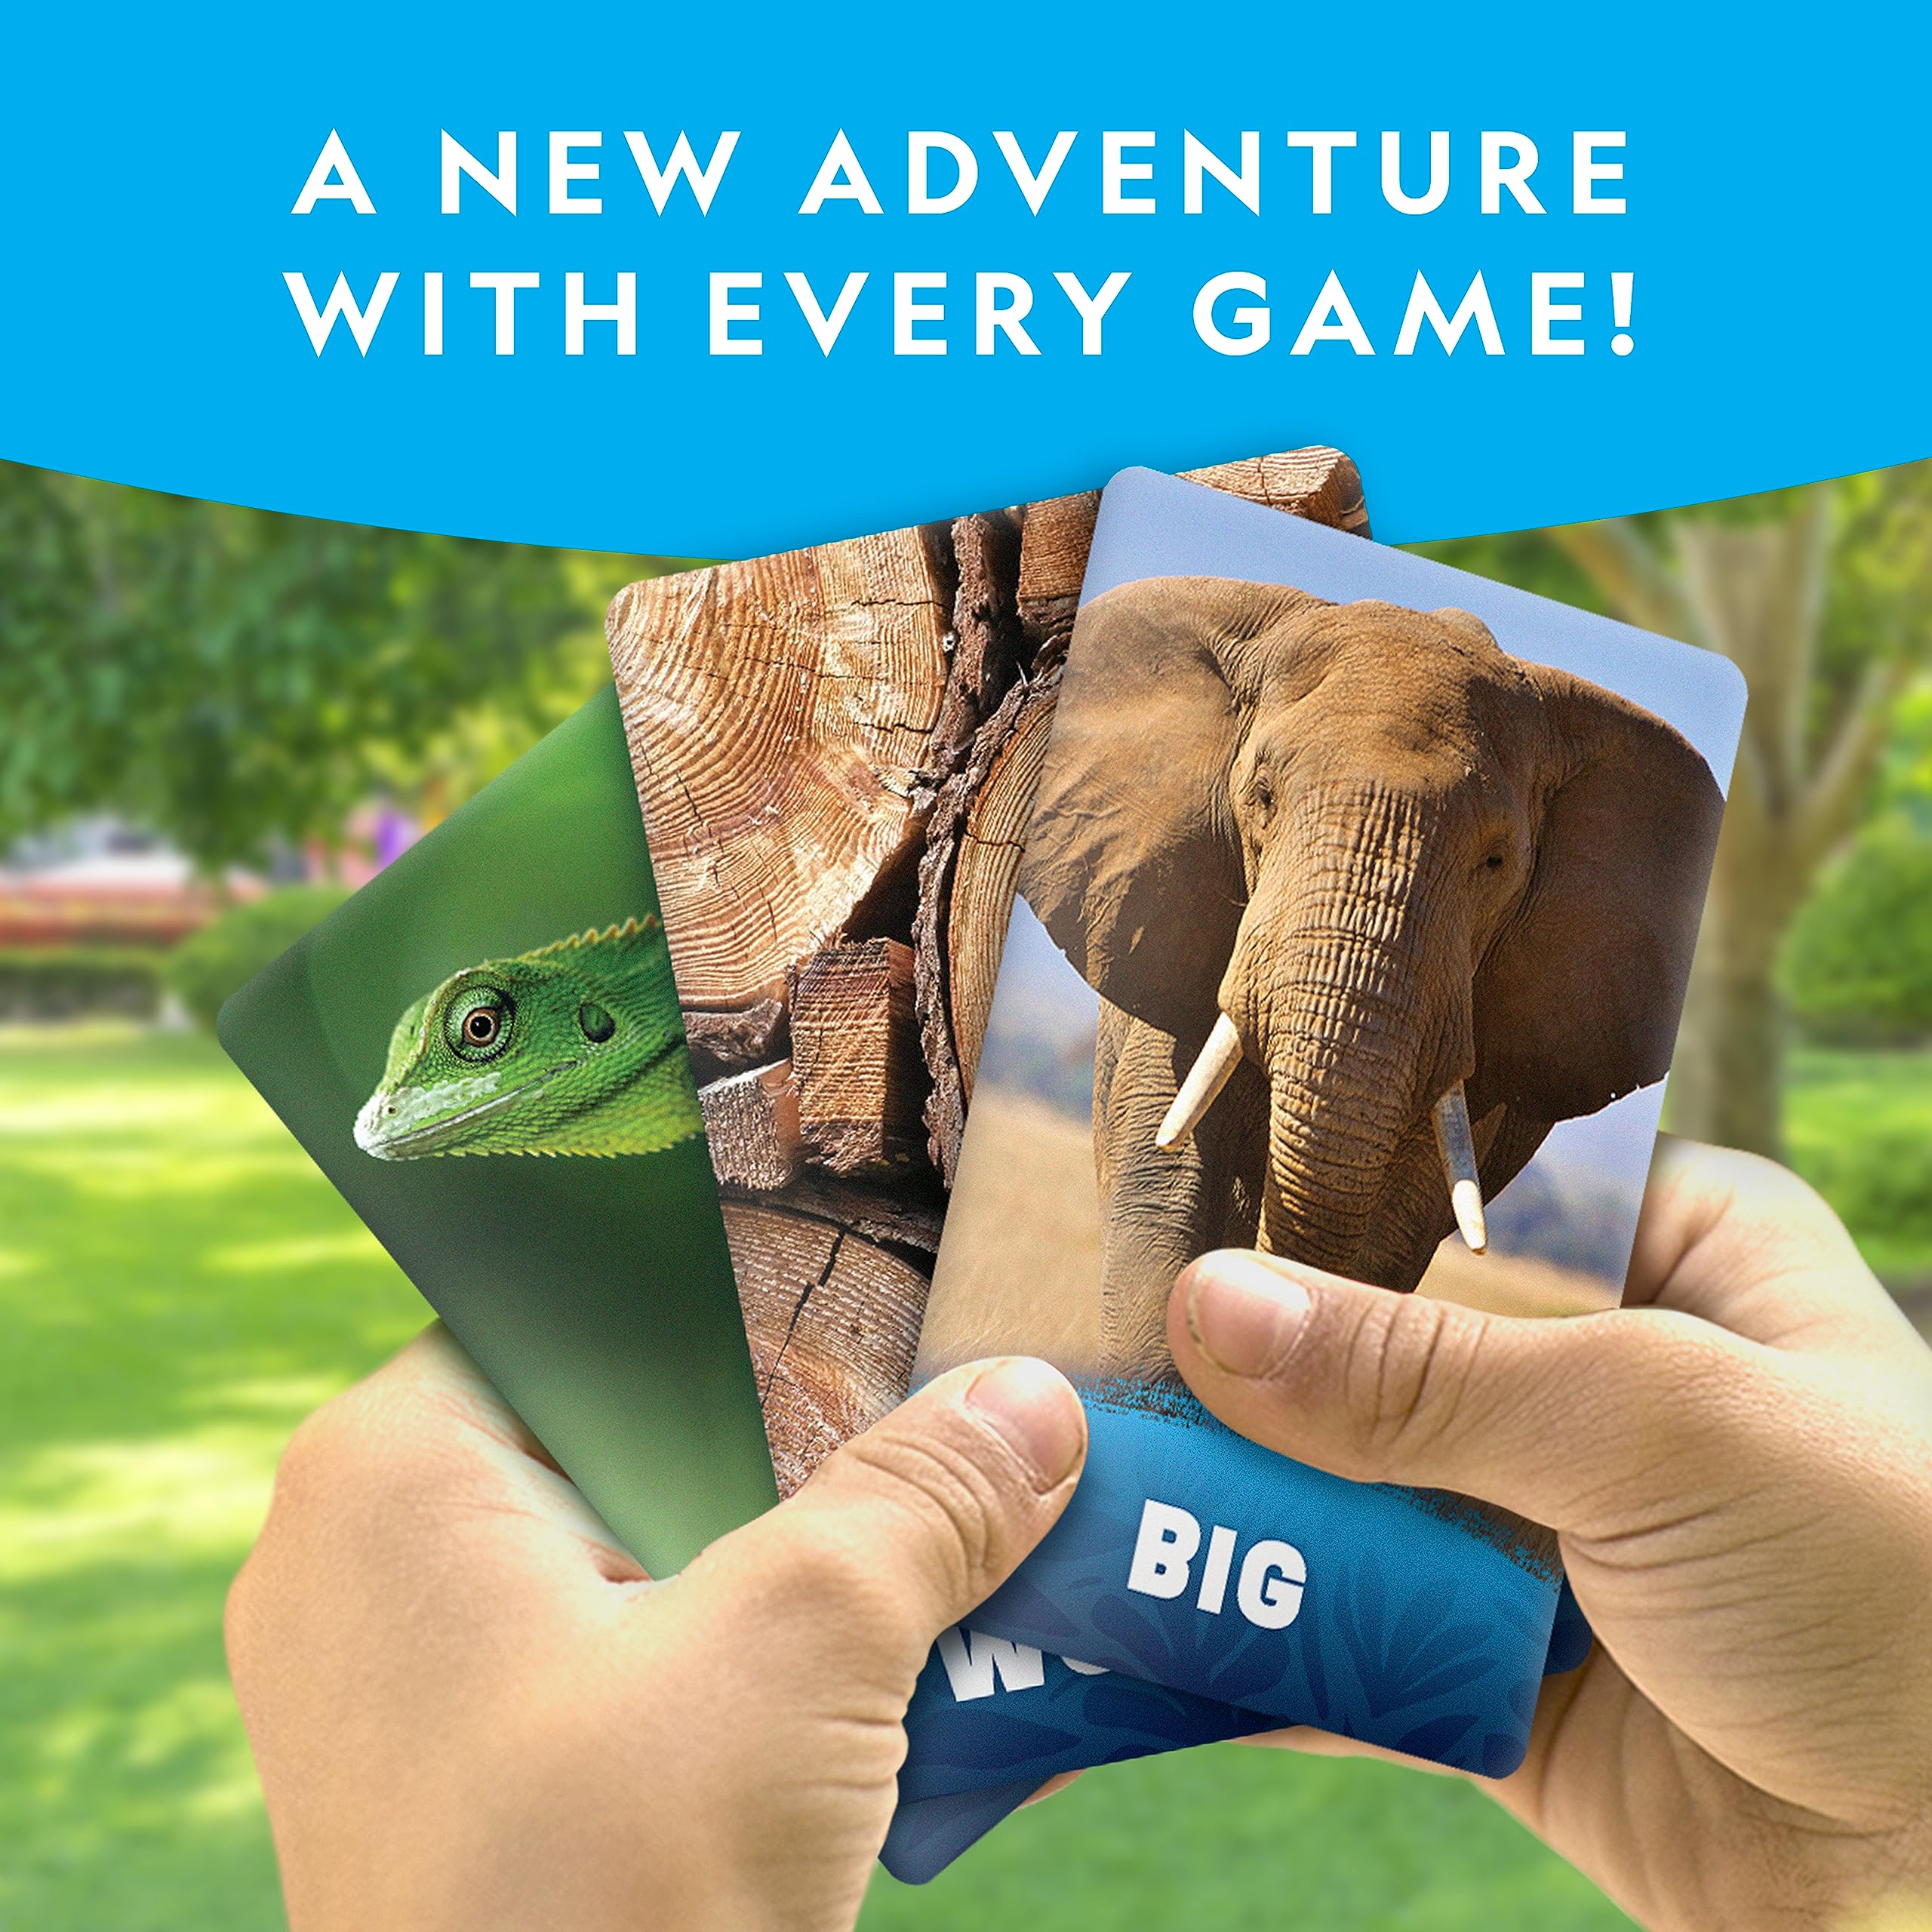 NATIONAL GEOGRAPHIC Scavenger Hunt for Kids Card Game - Seek & Match Objects from 40 Jumbo-Sized Cards, Camping Games, Activities for Toddlers, Car Game, Kids Outdoor Activities, Stocking Stuffers